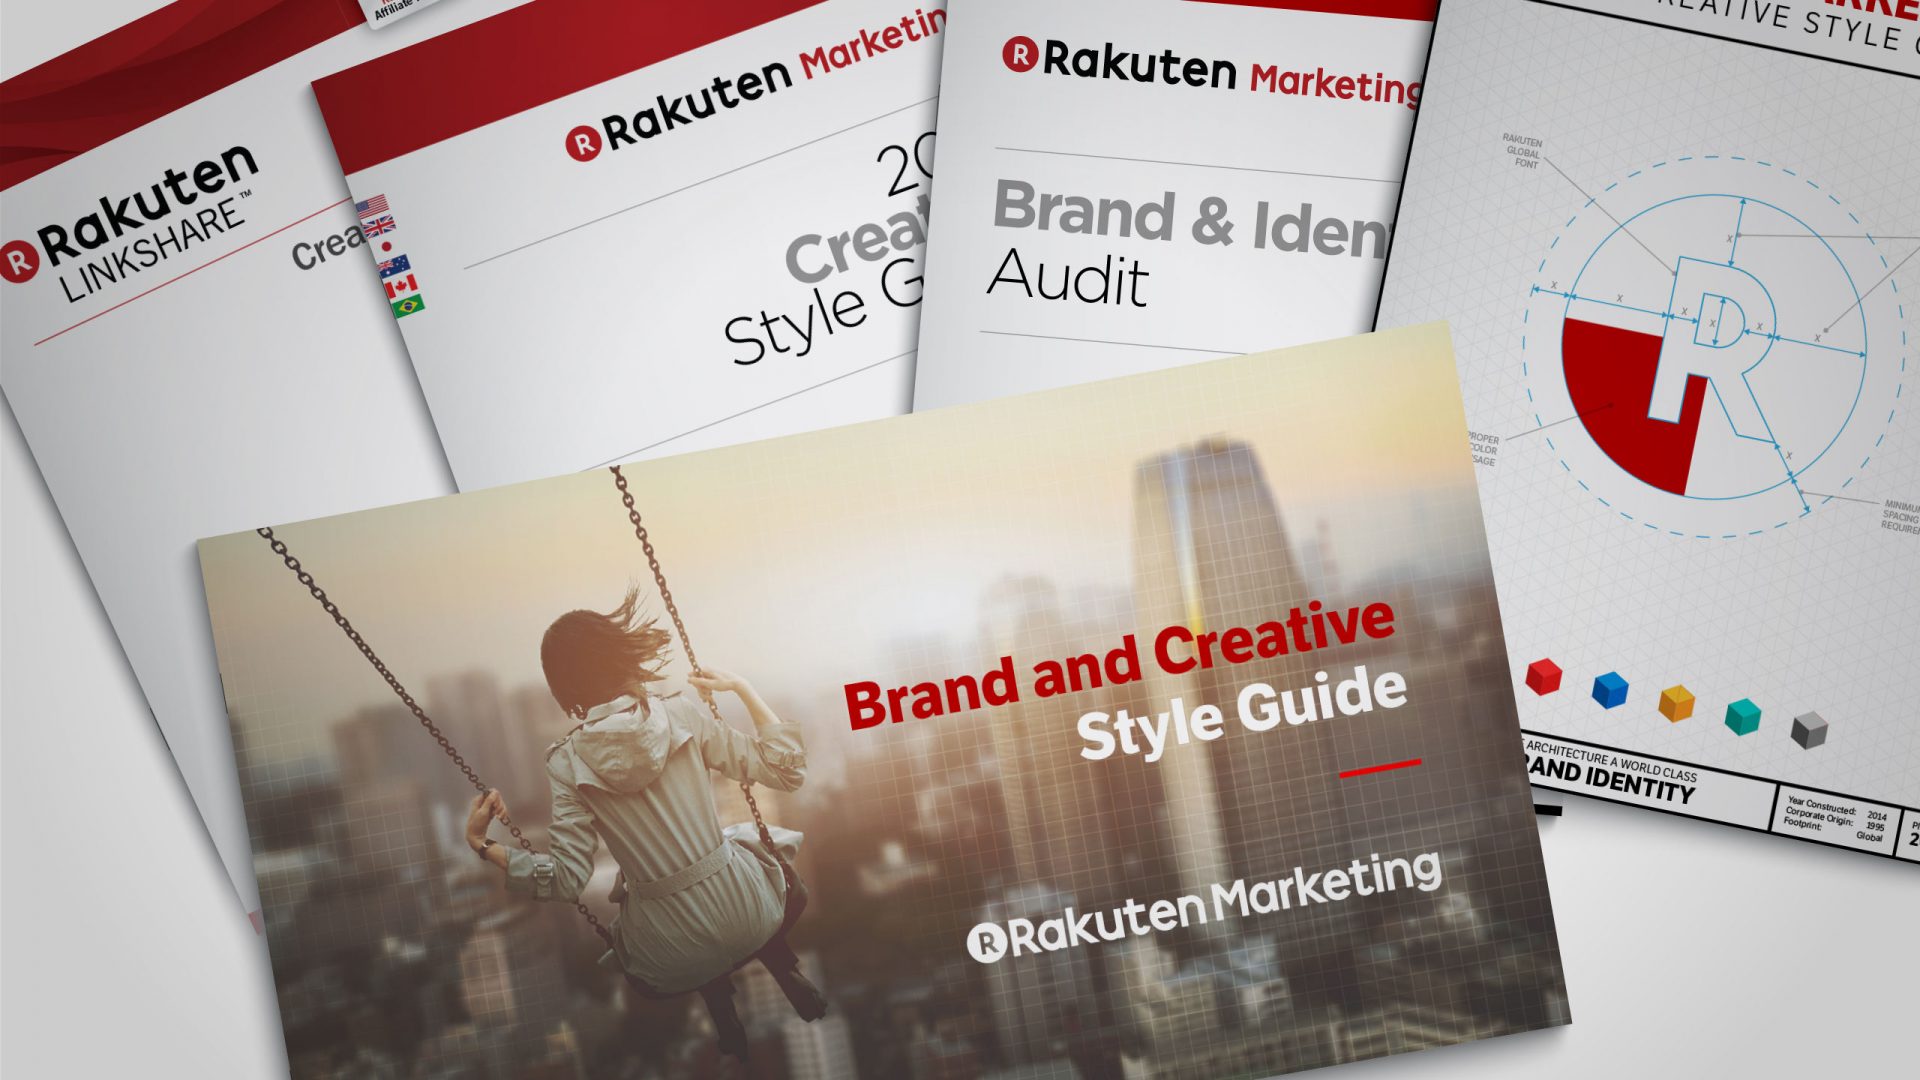 Brand & Creative Style Guides